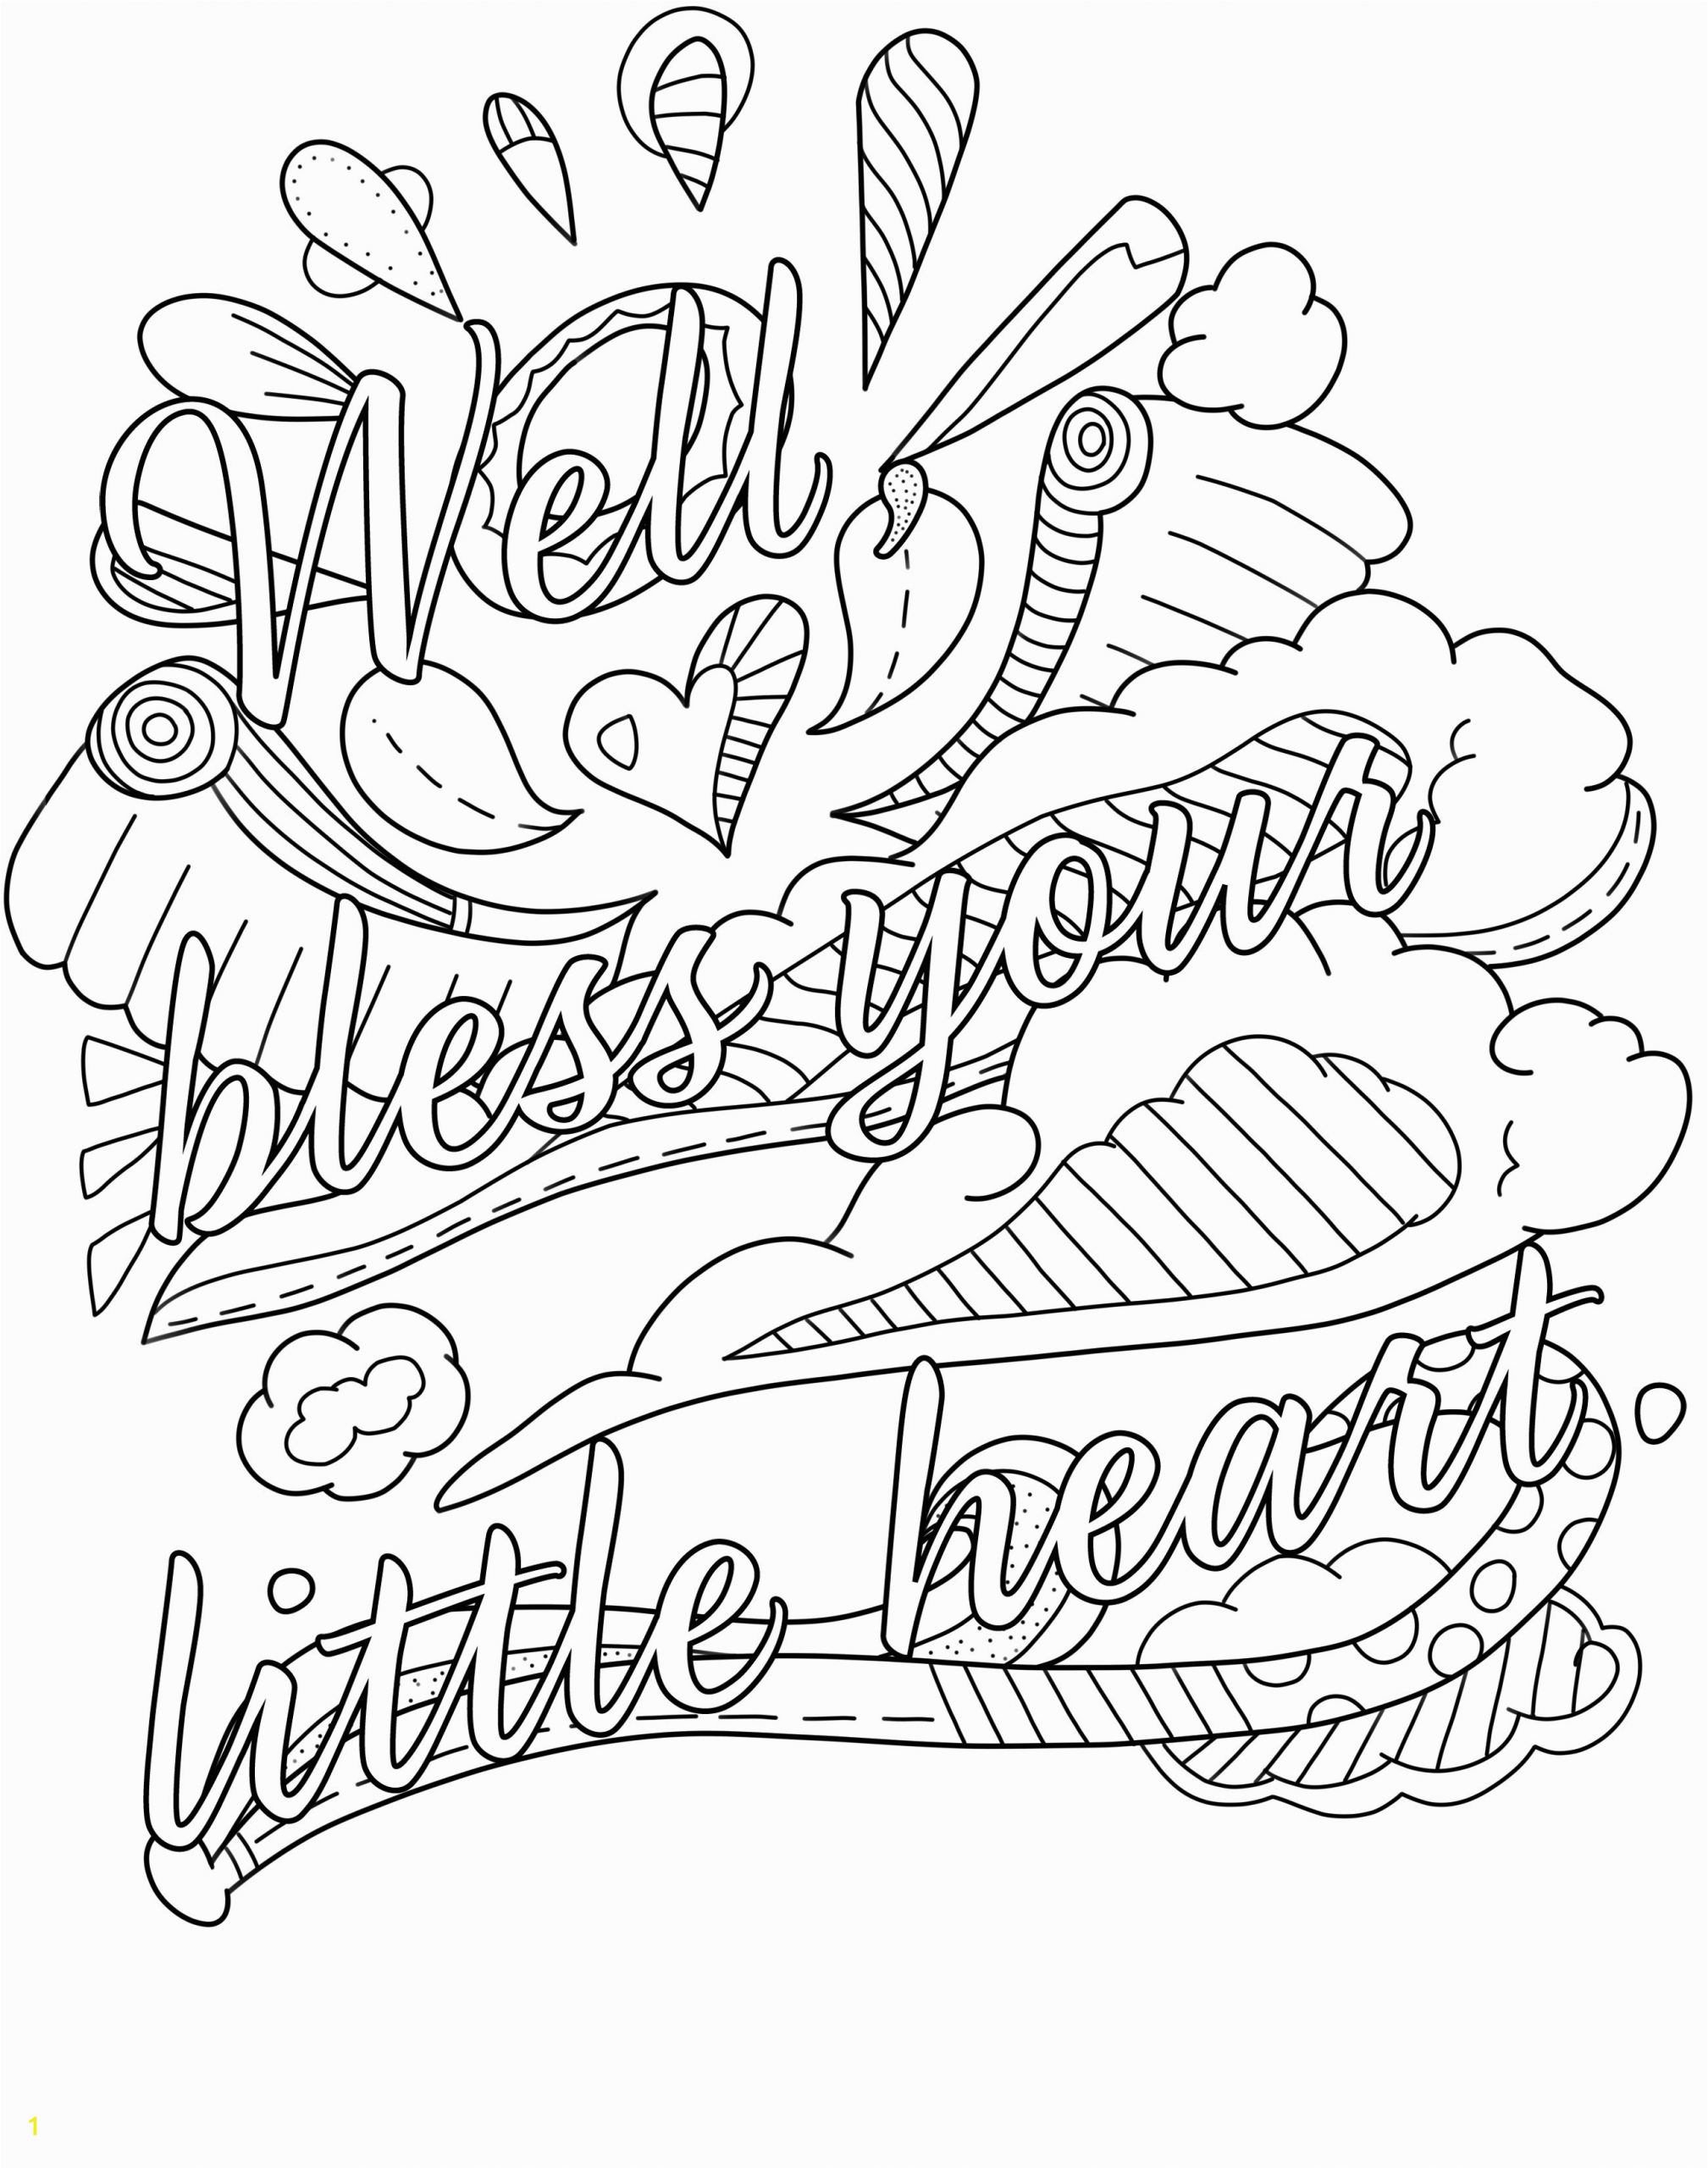 swear word adult coloring pages